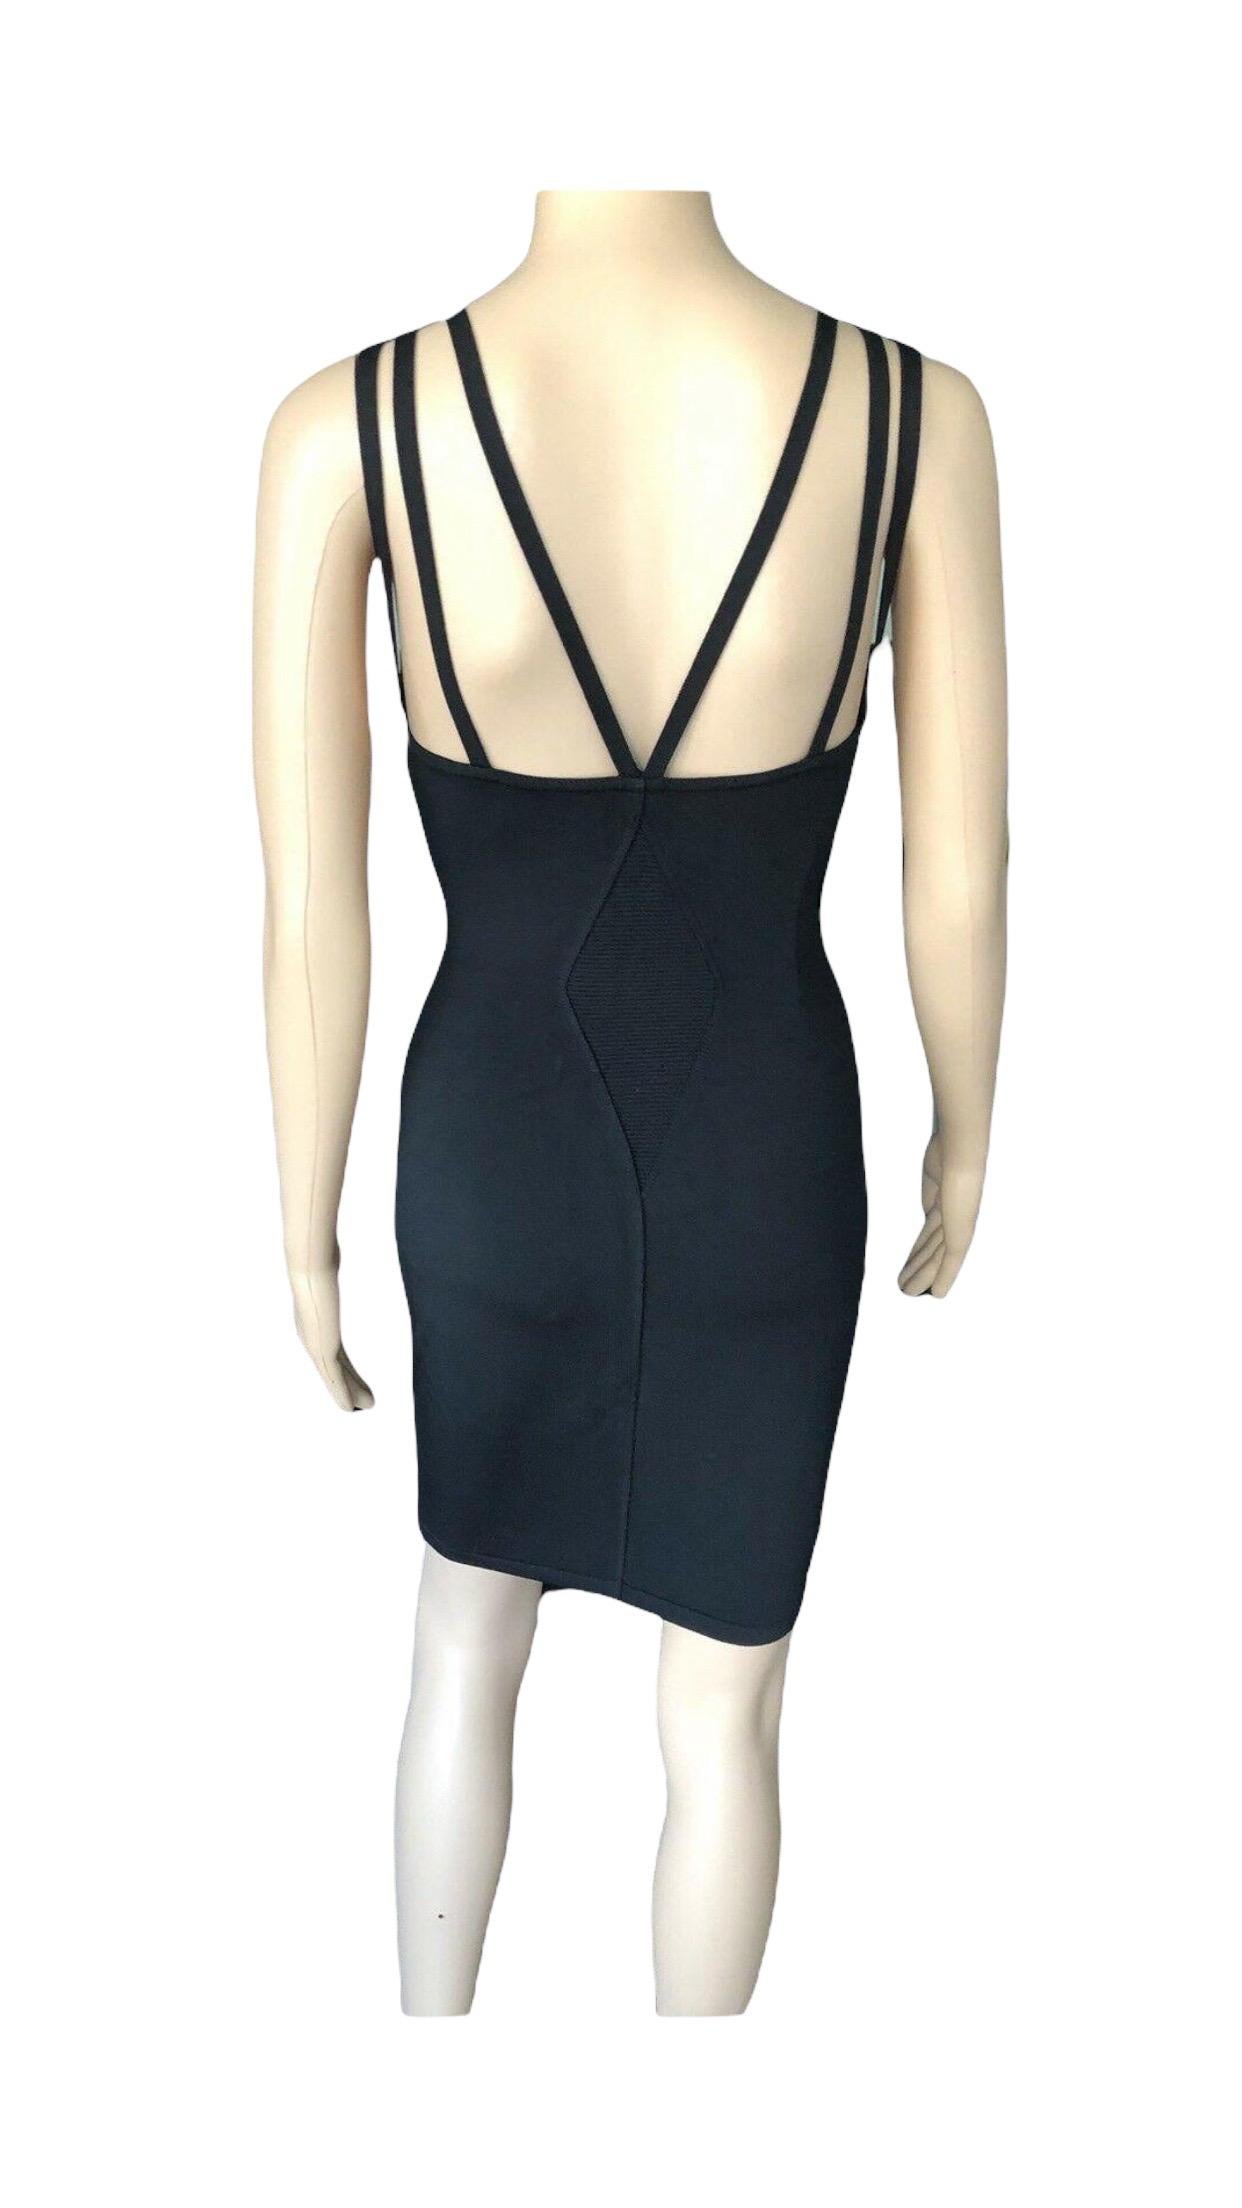 Azzedine Alaia S/S 1990 Vintage Black Bustier Fitted Dress  For Sale 2